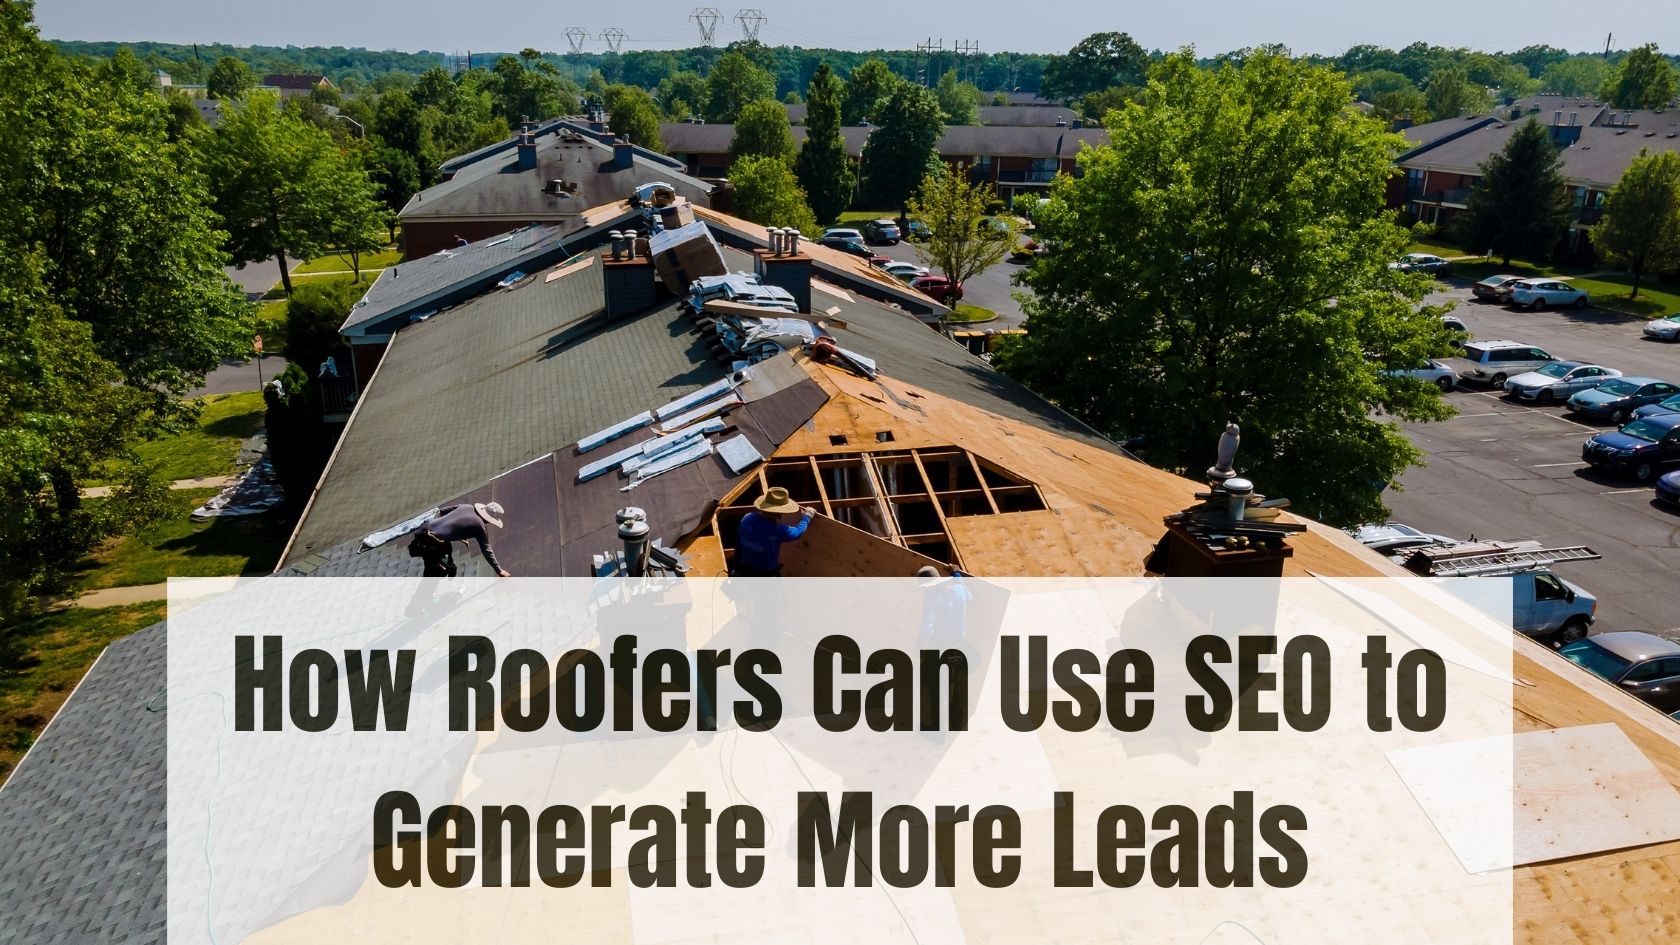 How Roofers Can Use SEO to Generate More Leads - How Roofers Can Use SEO to Generate More Leads